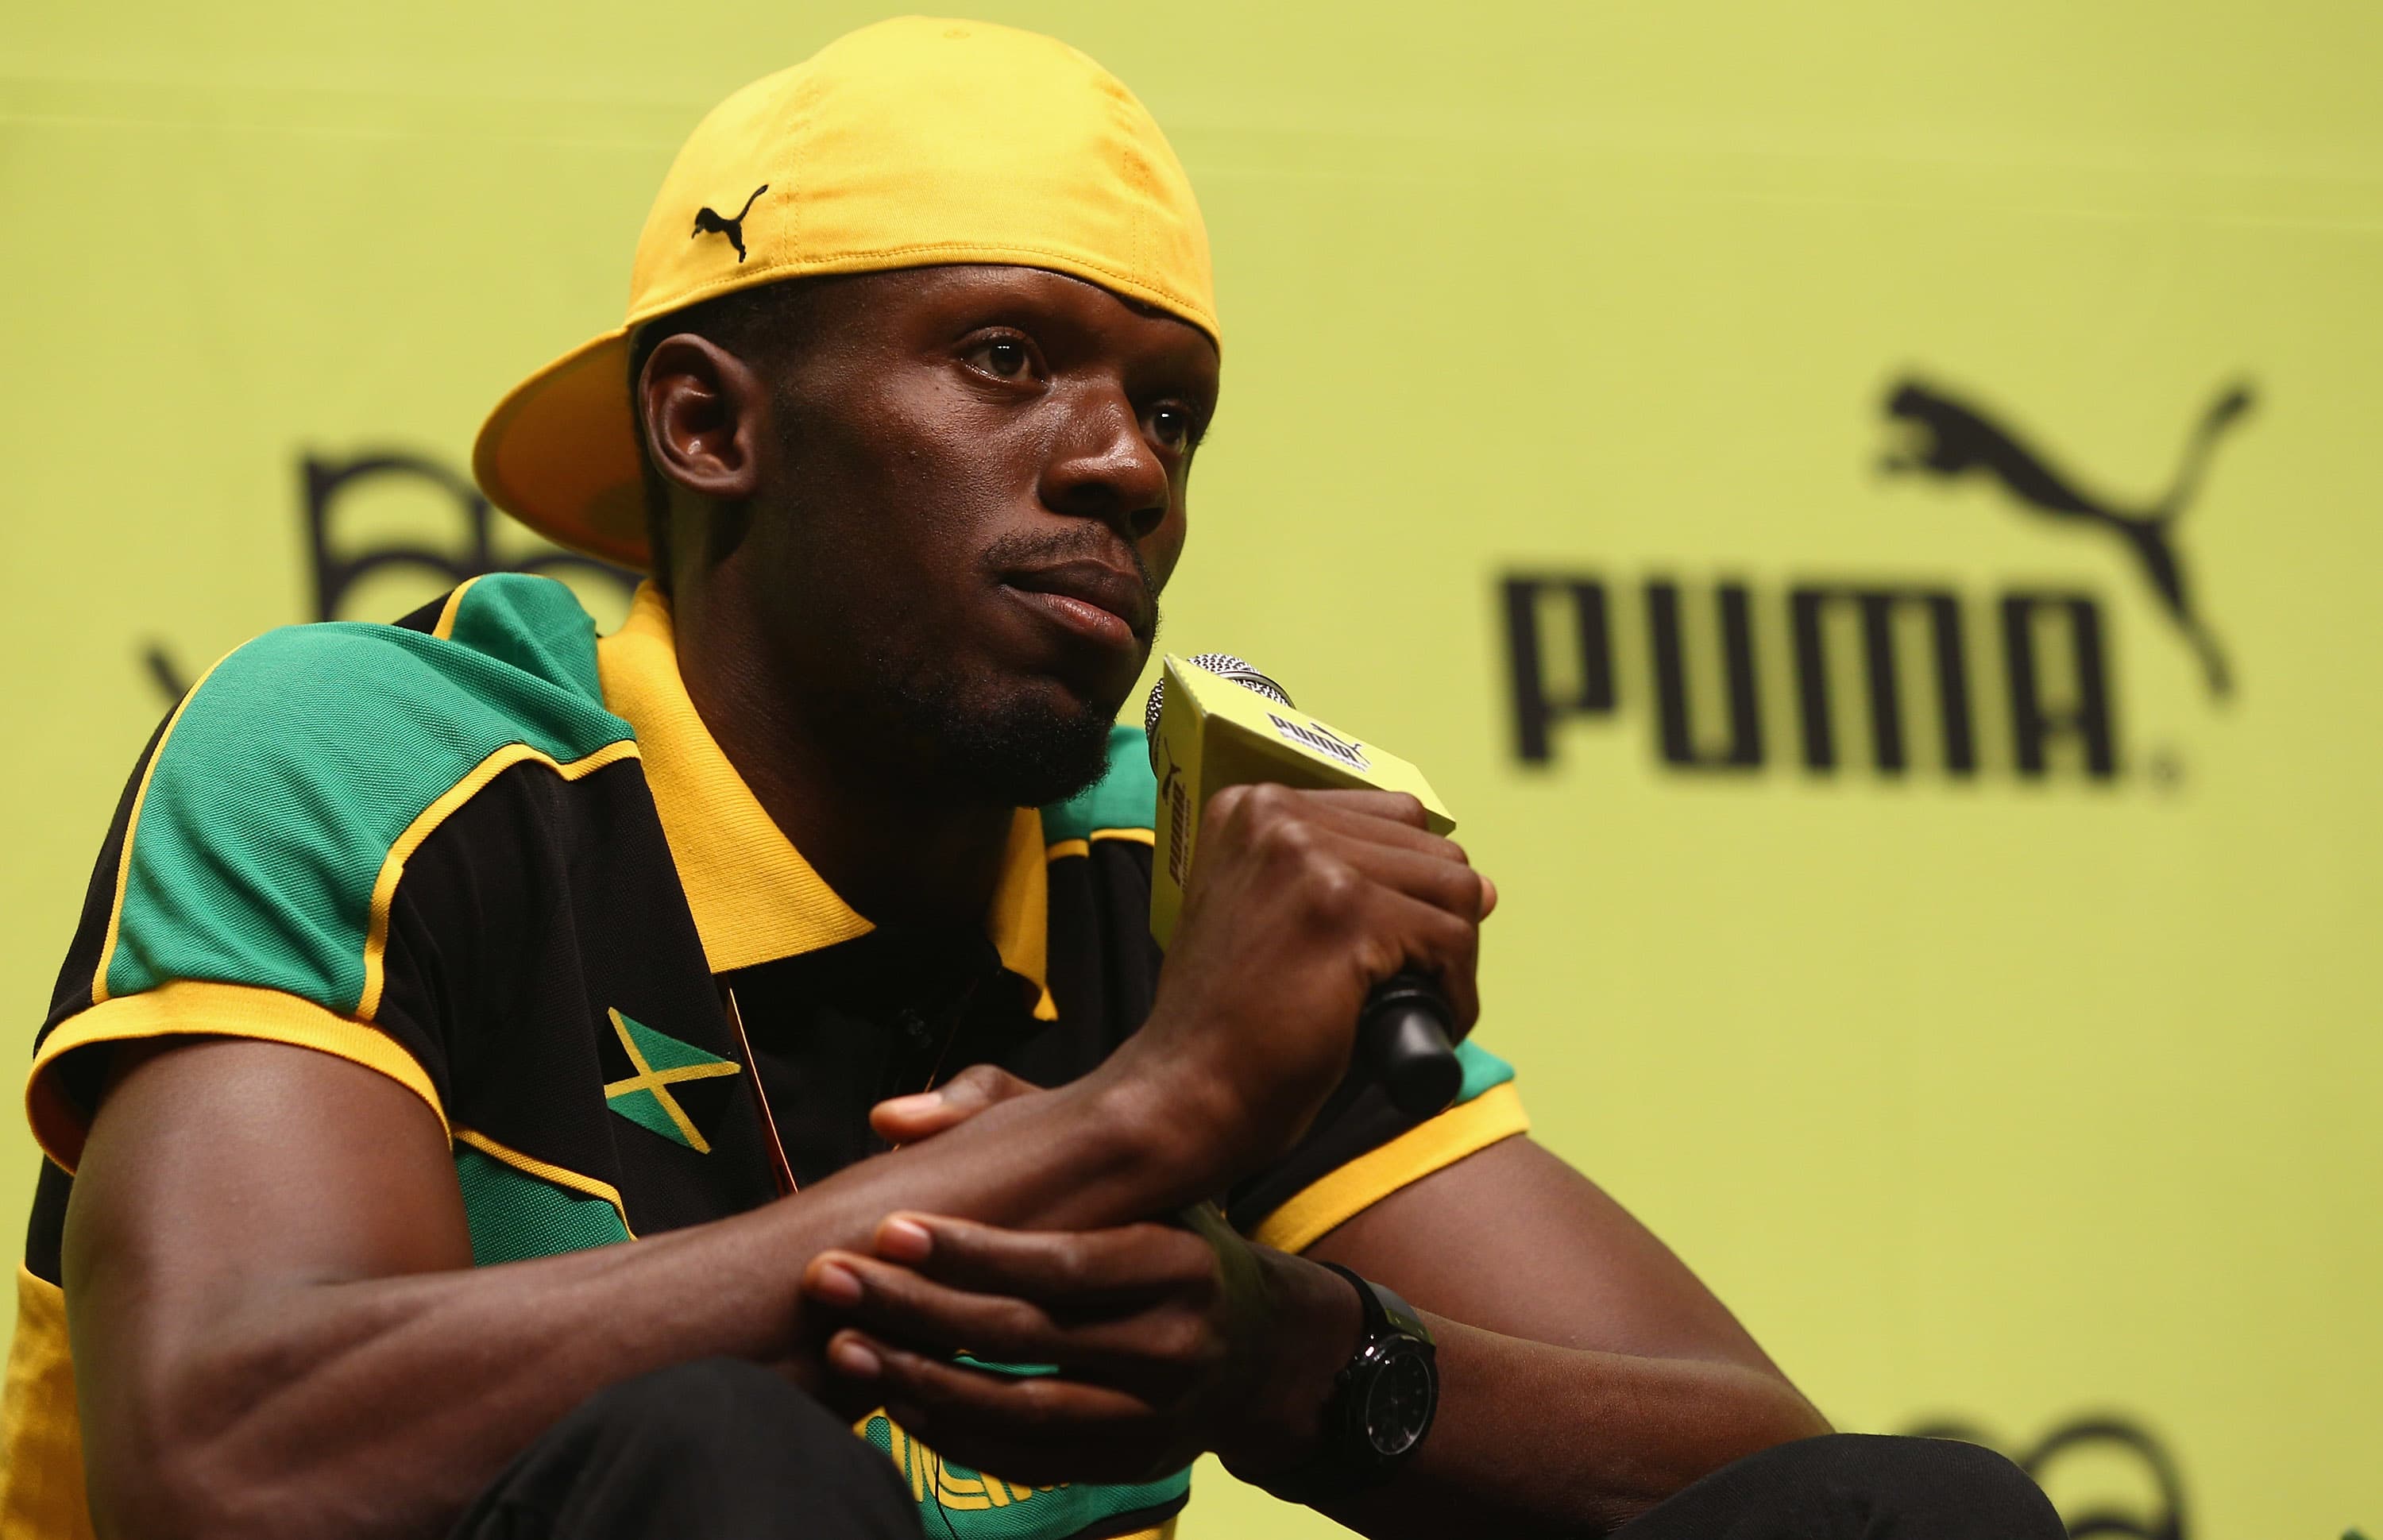 koppeling diep President How Puma nearly dropped Usain Bolt